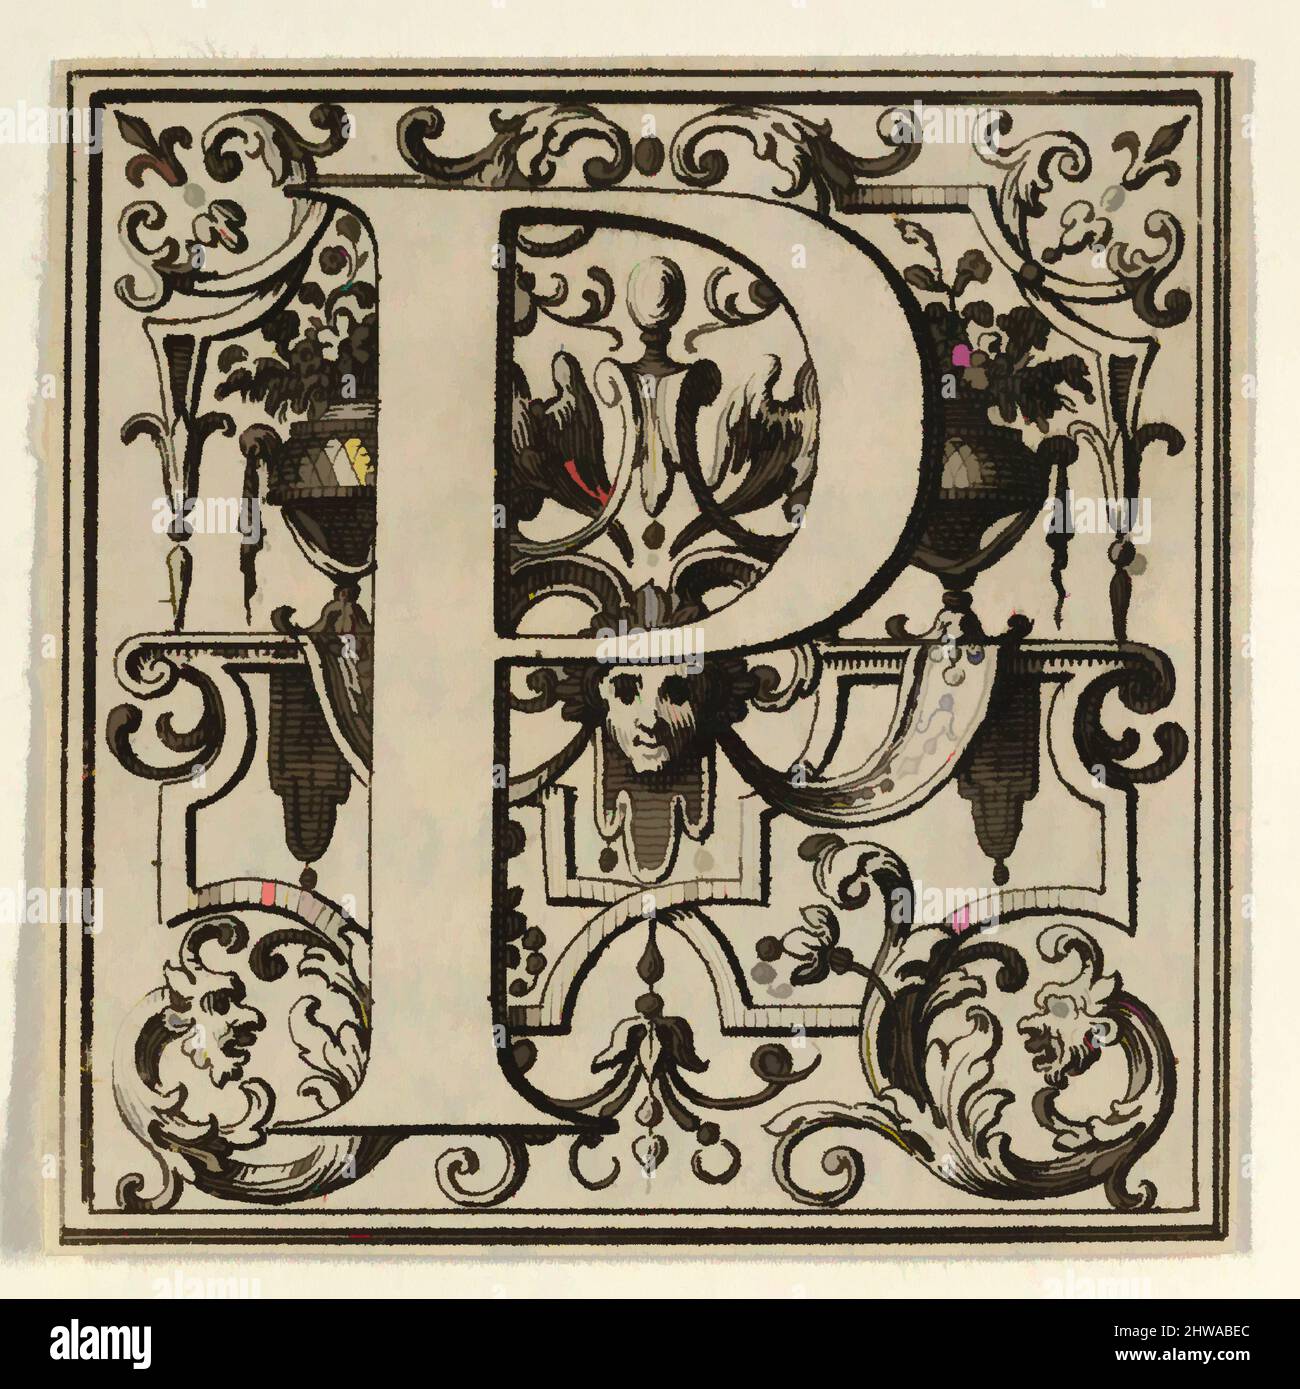 Art inspired by Drawings and Prints, Print, Roman Alphabet letter P with Louis XIV decoration, Artist, Bernard Picart, French, Paris 1673–1733, Classic works modernized by Artotop with a splash of modernity. Shapes, color and value, eye-catching visual impact on art. Emotions through freedom of artworks in a contemporary way. A timeless message pursuing a wildly creative new direction. Artists turning to the digital medium and creating the Artotop NFT Stock Photo